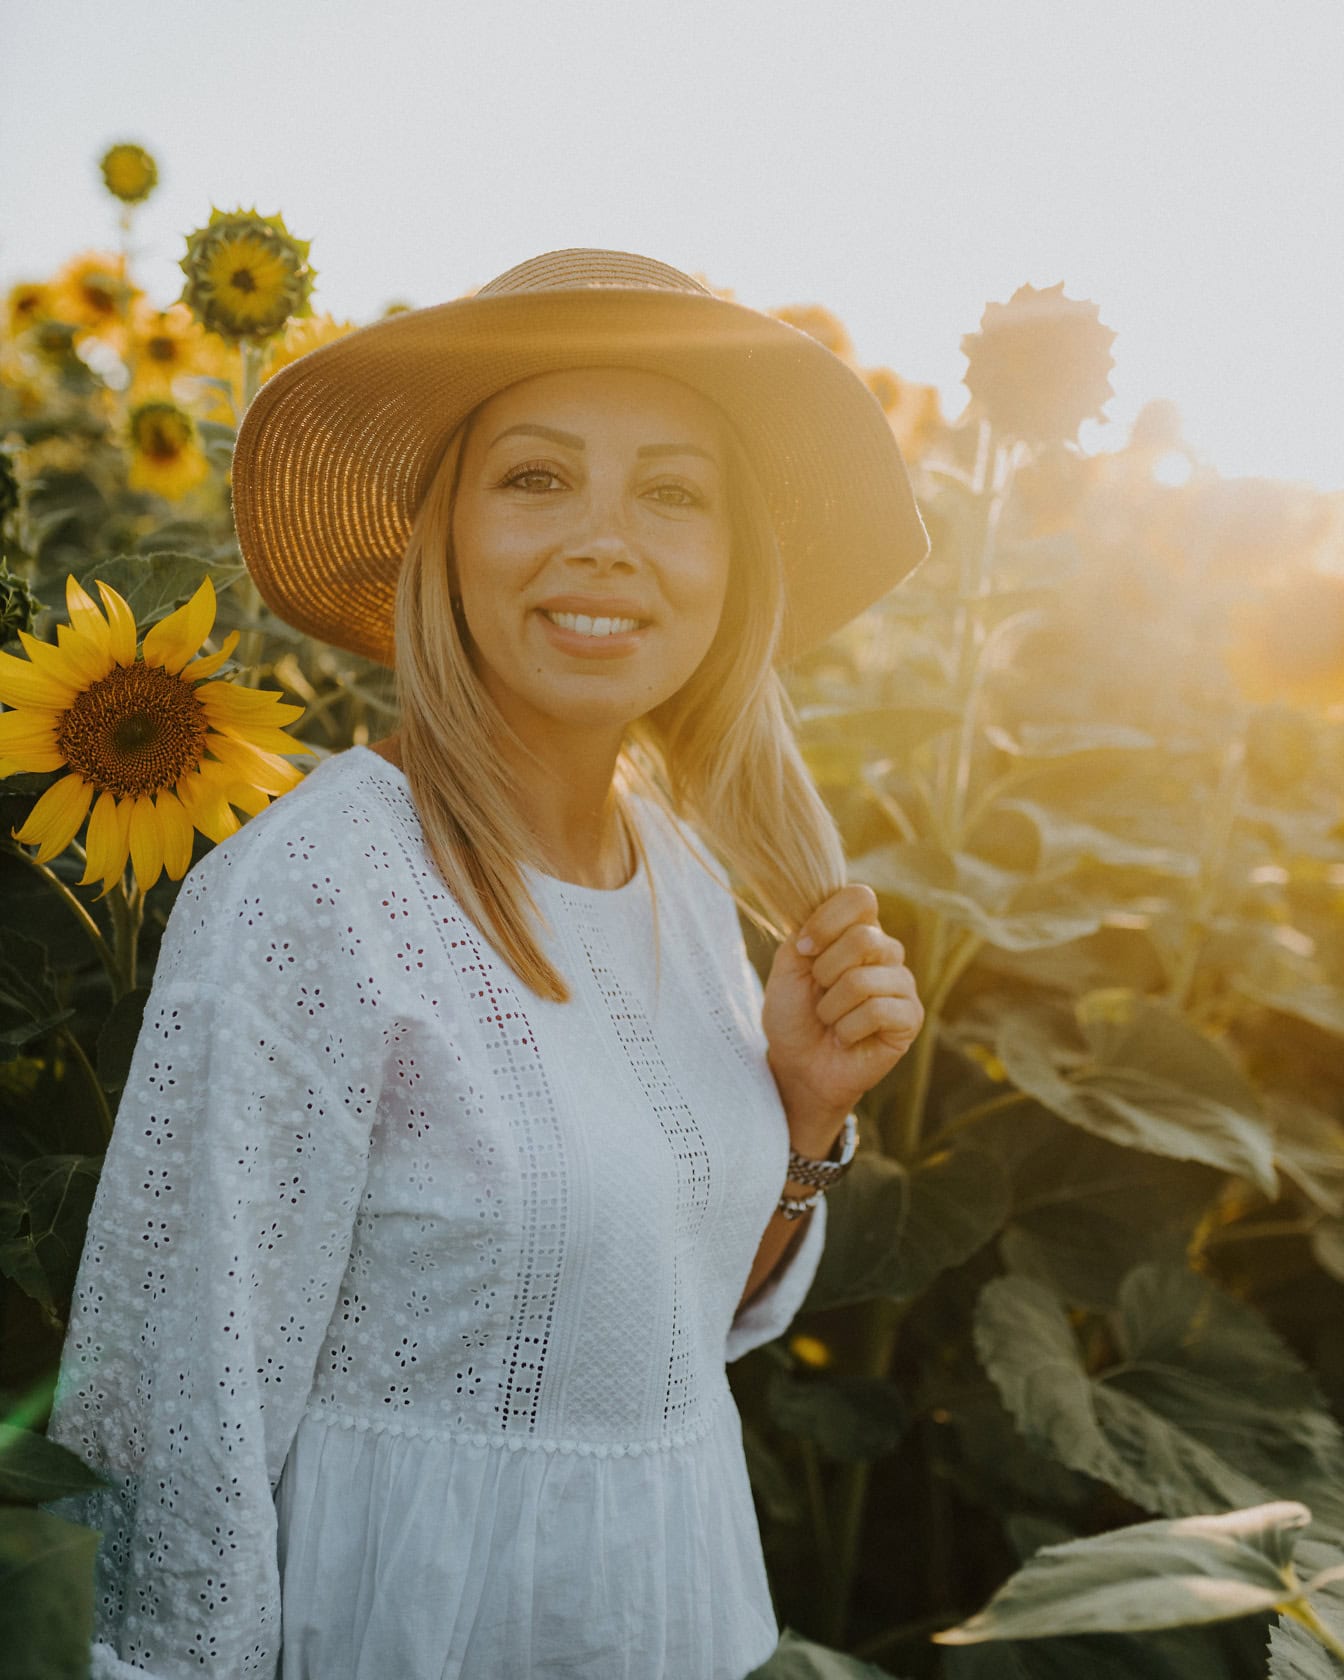 Portrait of a smiling country girl in a straw hat in a sunflower field with bright sunlight as a backlight